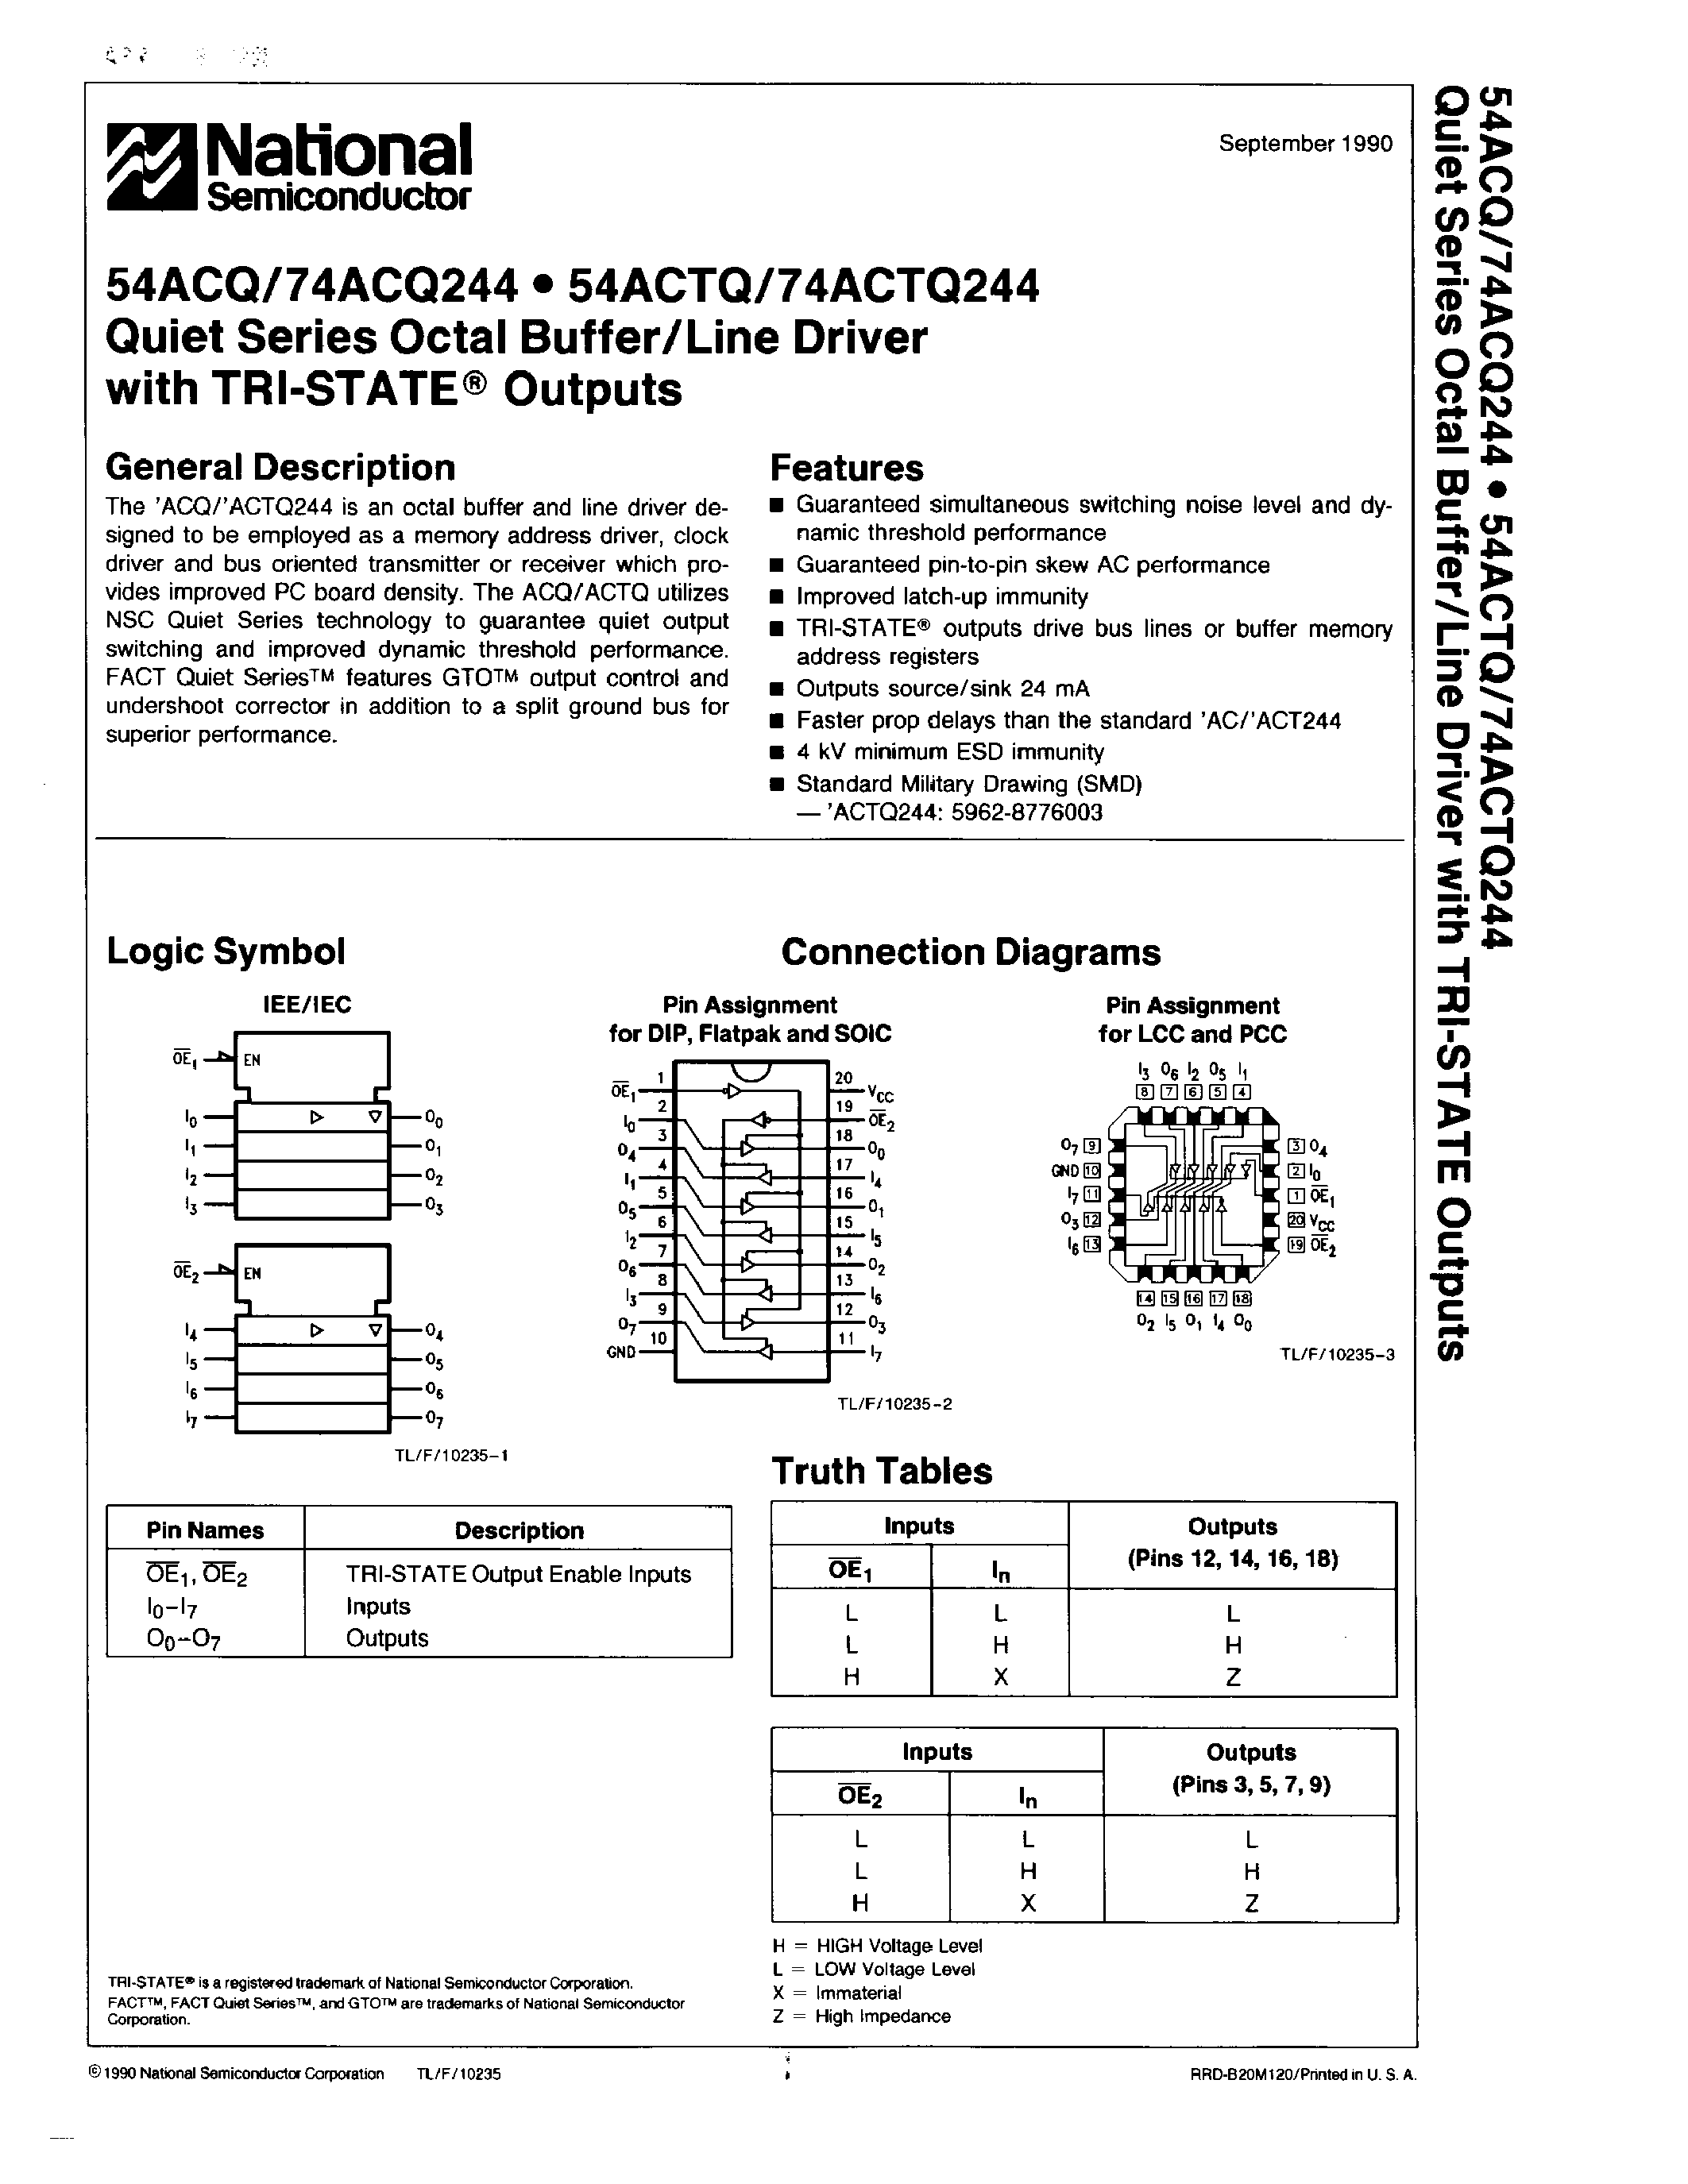 Datasheet 74ACQ244D - Quiet Seres Octal Buffer/Line Driver with TRI-STATE Outputs page 1